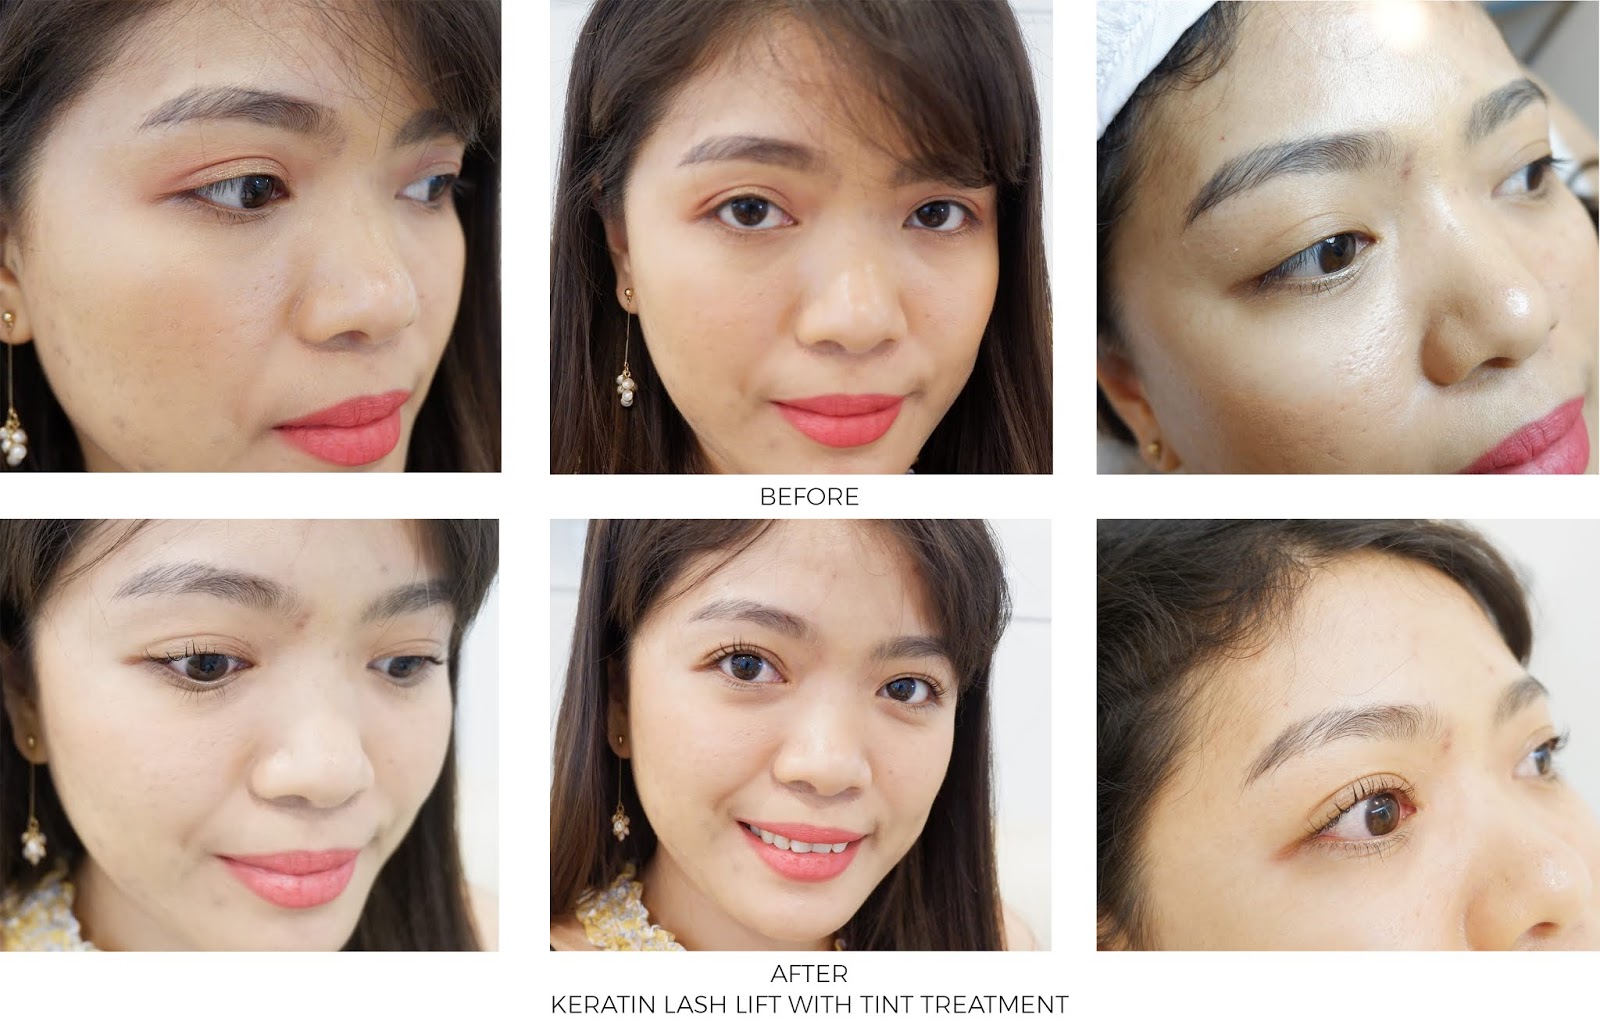 SKINHOUSE BEAUTY AND LASER CLINIC: MY FIRST KERATIN LASH LIFT WITH TINT EXPERIENCED 